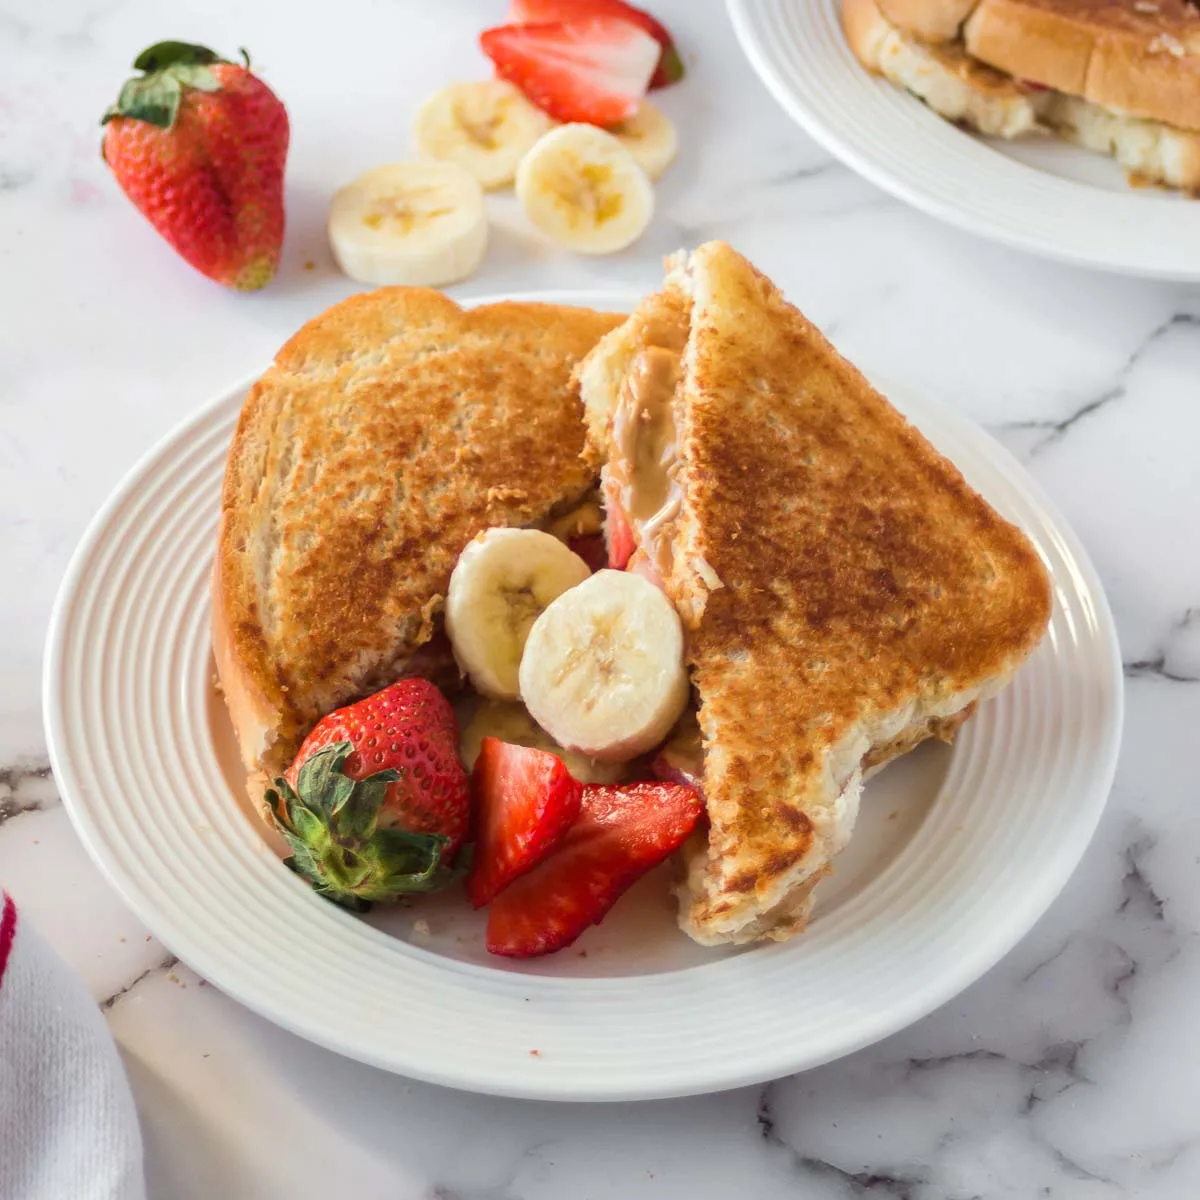 Grilled peanut butter sandwich sliced on a plate with fresh strawberries and banana.